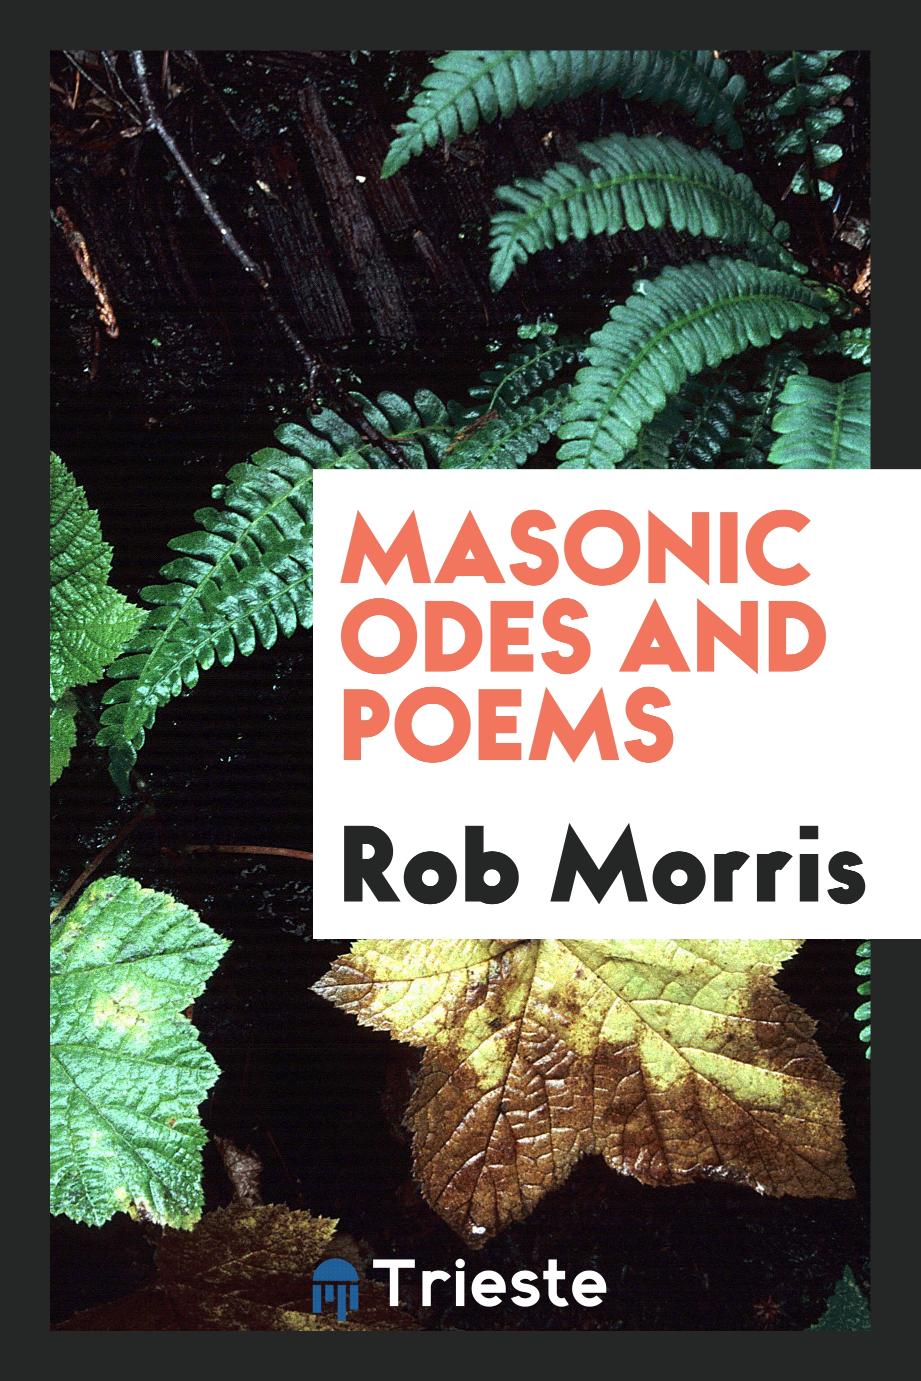 Masonic odes and poems